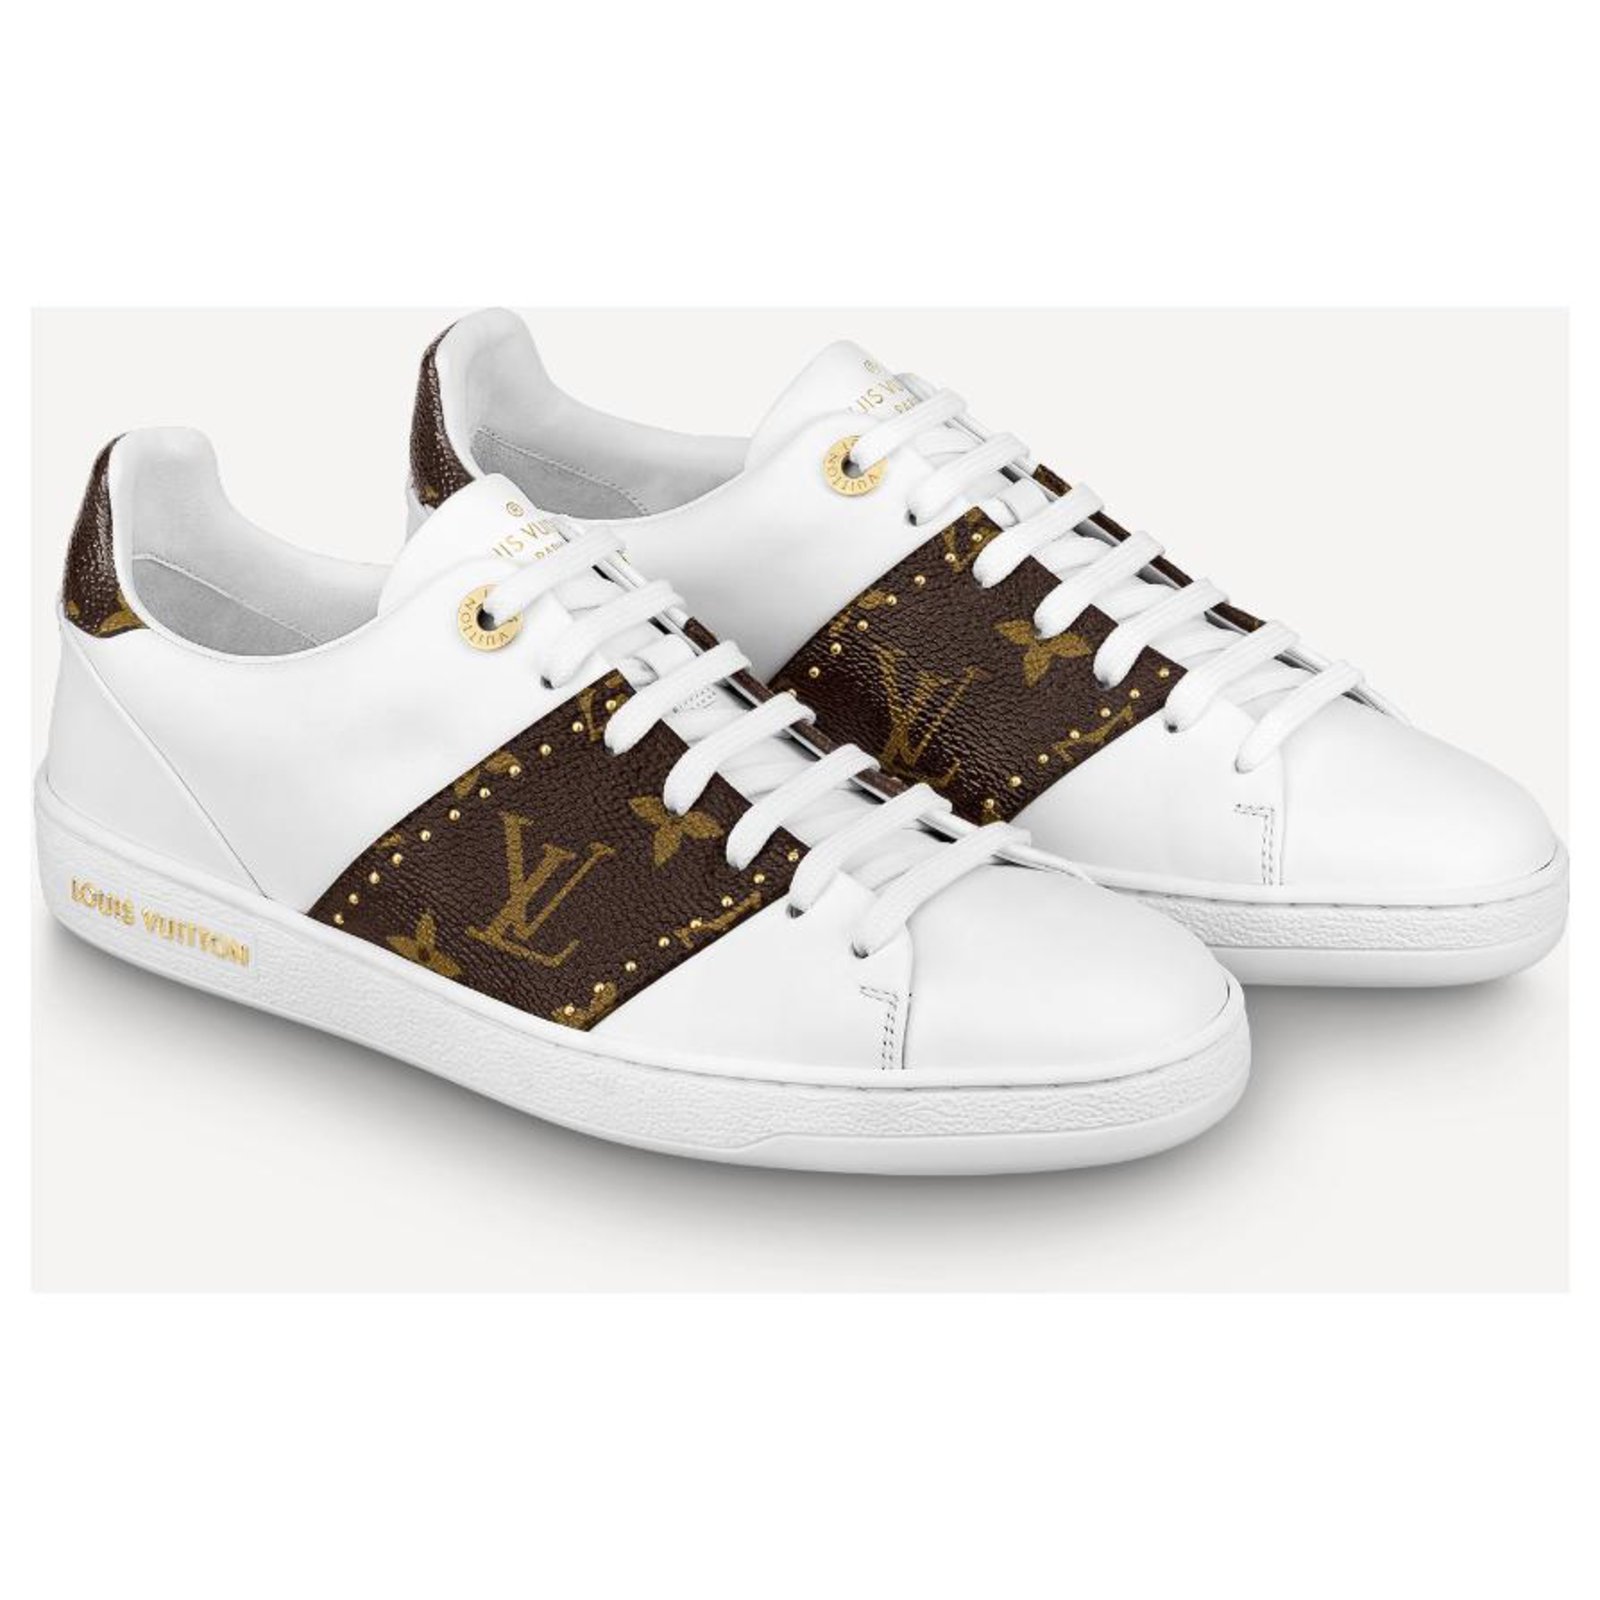 Louis Vuitton - Authenticated FRONTROW Trainer - Leather White Plain for Women, Good Condition